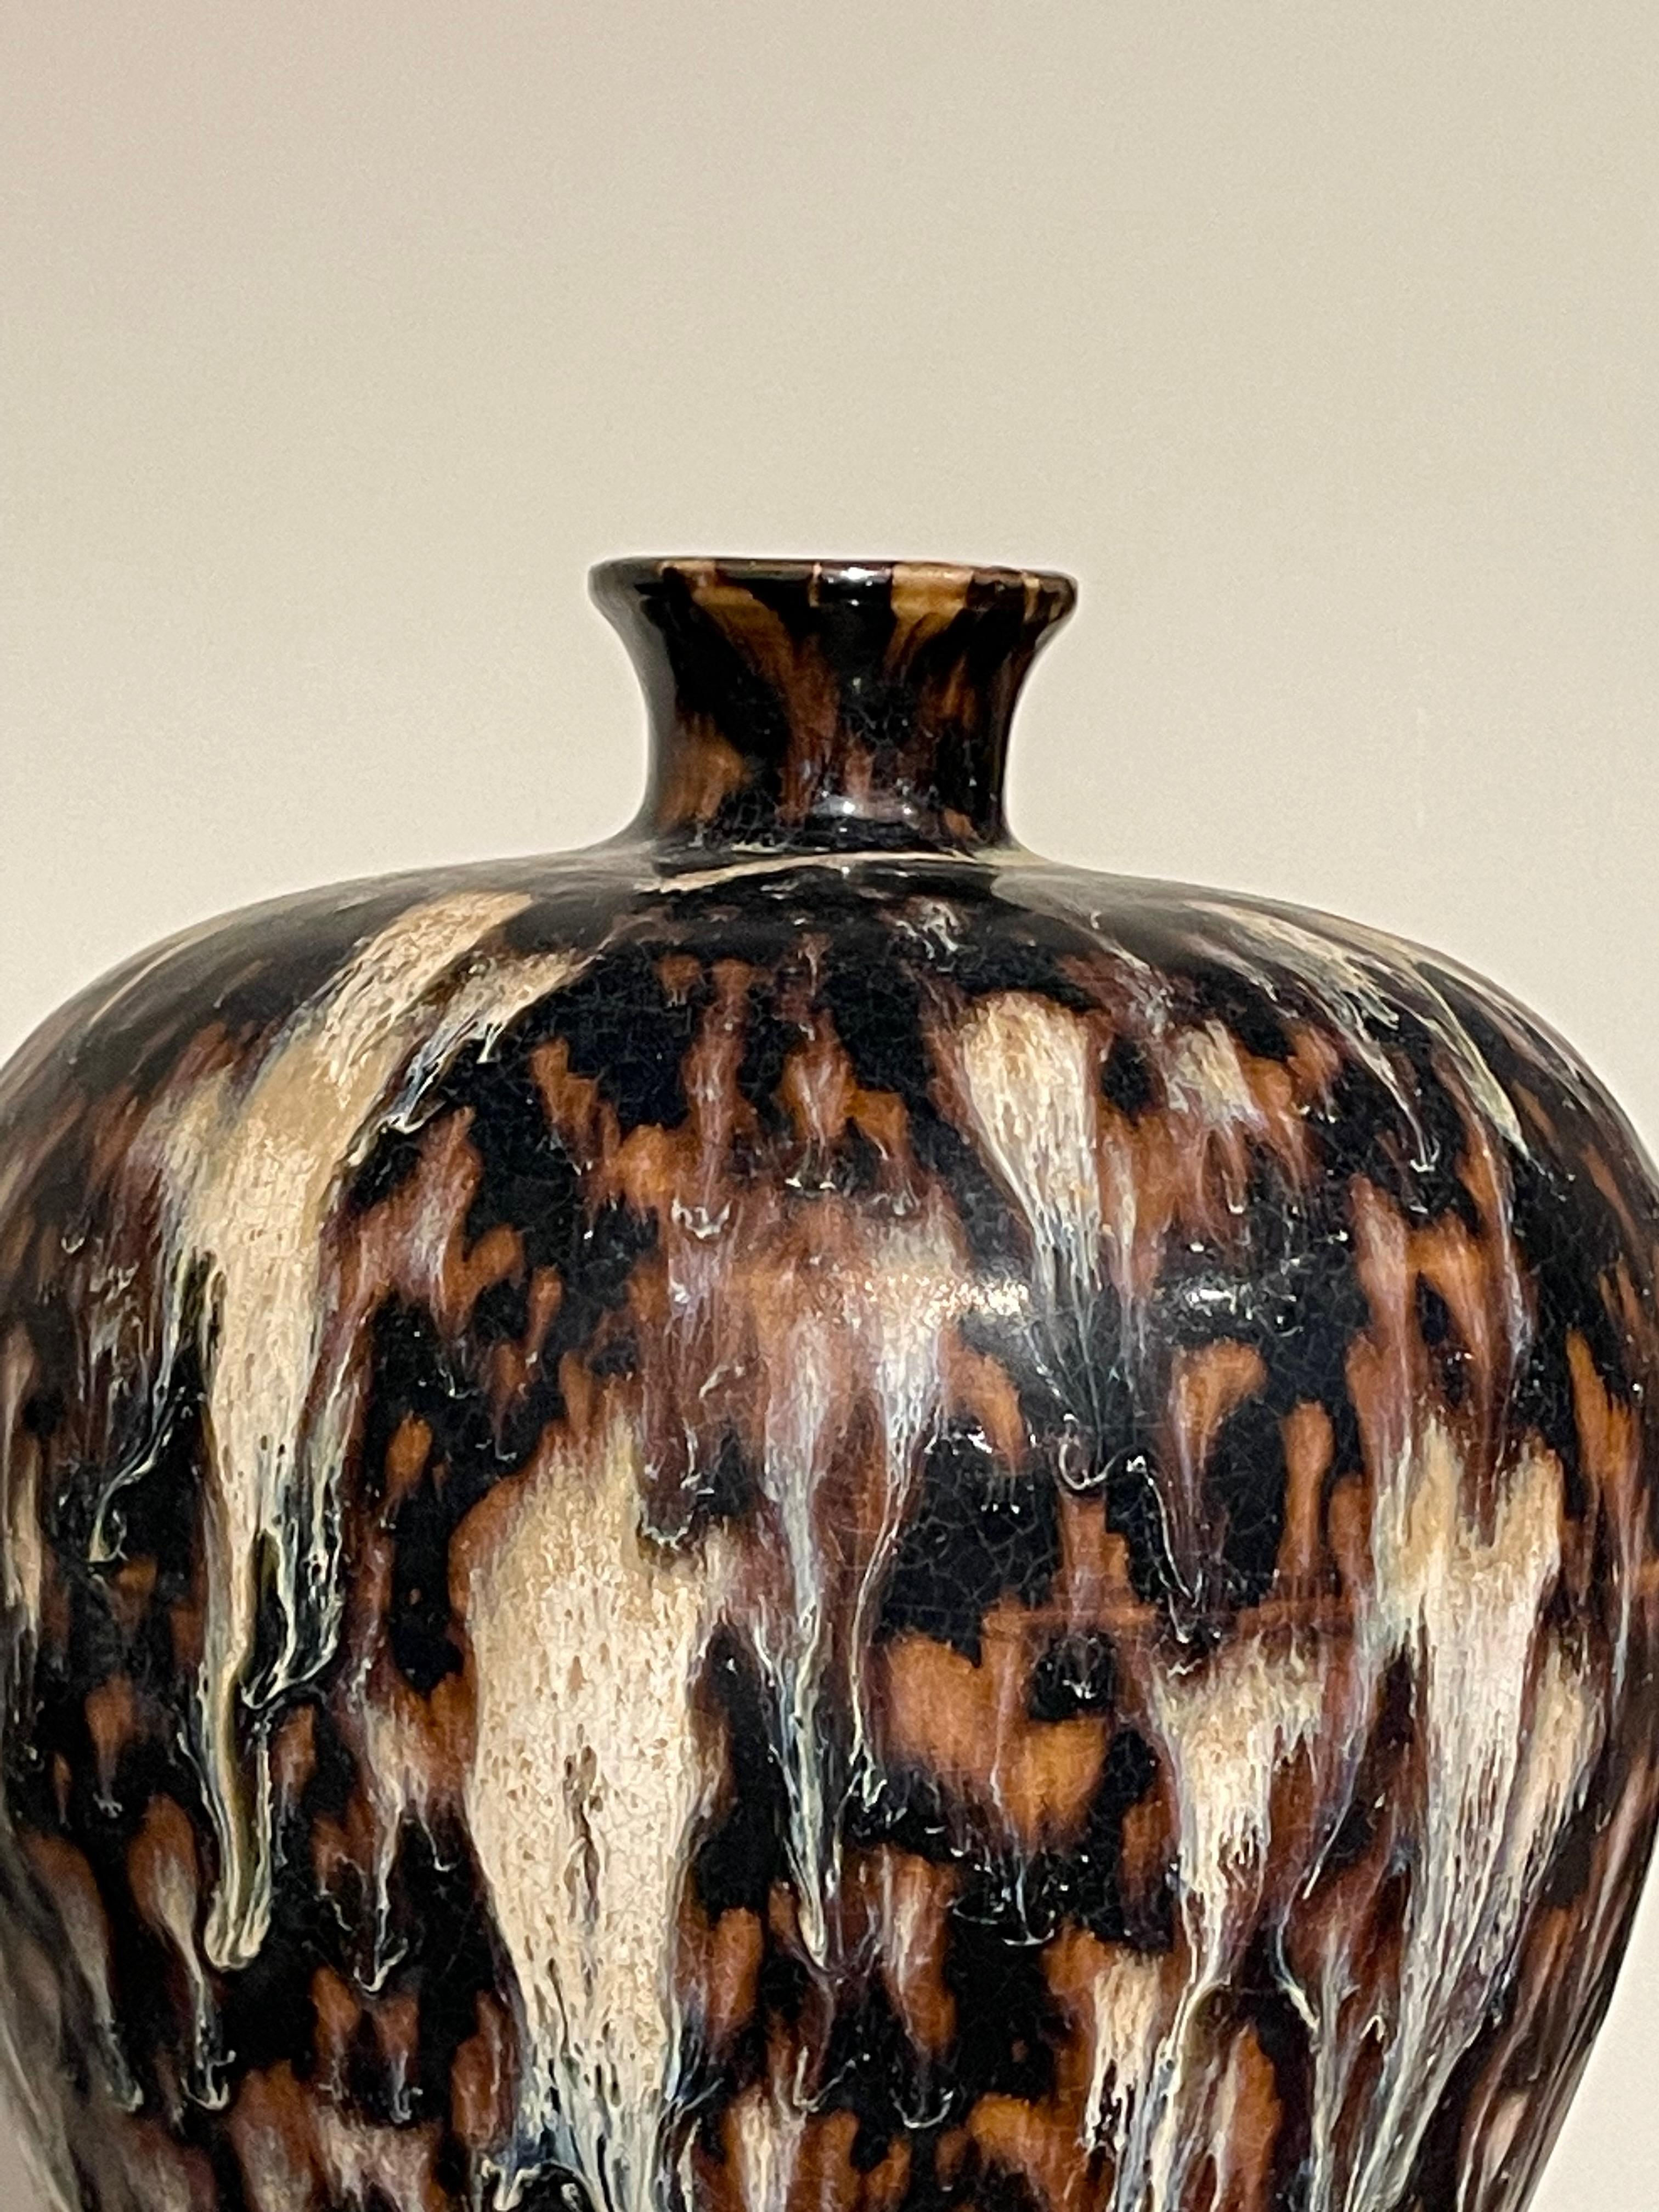 Contemporary Chinese hour glass shaped vase with tortoise effect glaze.
Black, brown and cream colors.
Two available and sold individually.
